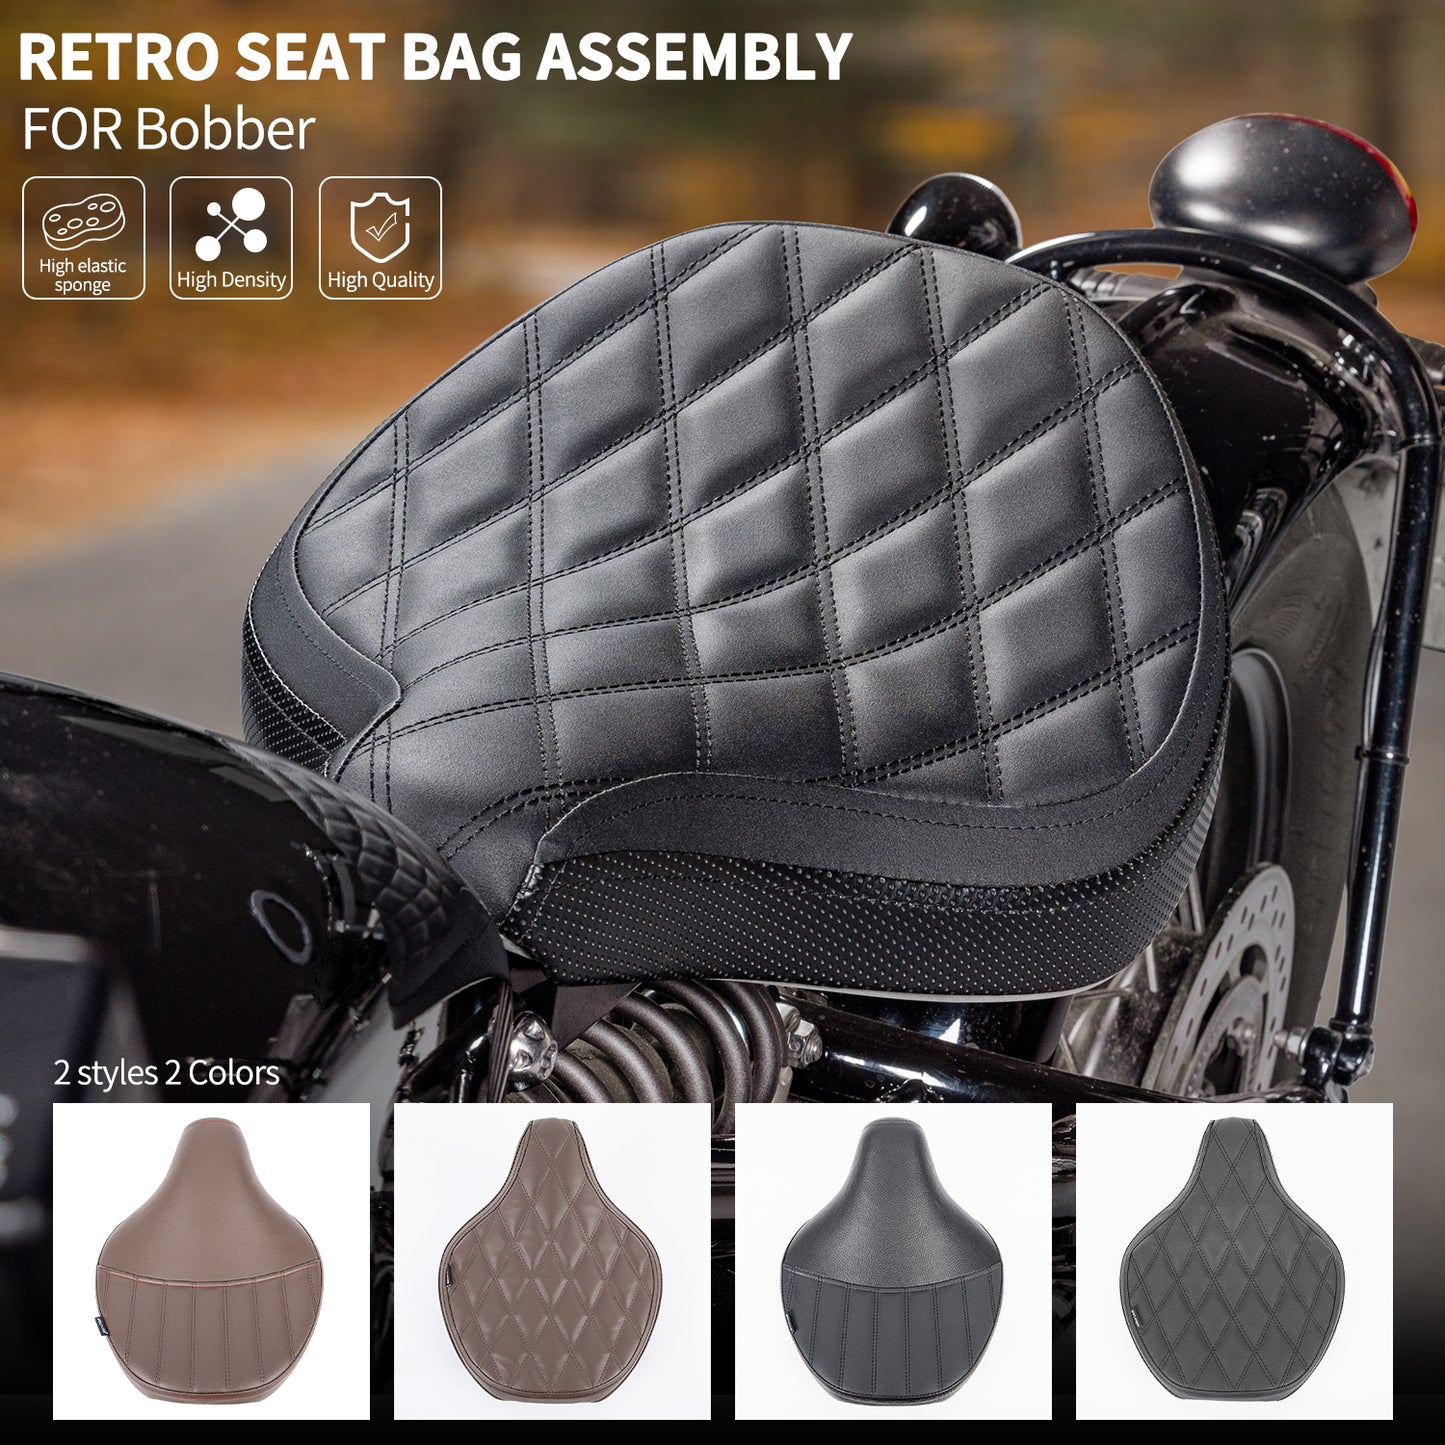 Wolfline Front Driver Solo Seat Cover For Triumph Bobber 2017 2018 2019 2020 2021 2022 2023 Thicken Cushion Vintage Motorcycle Pillion Seat